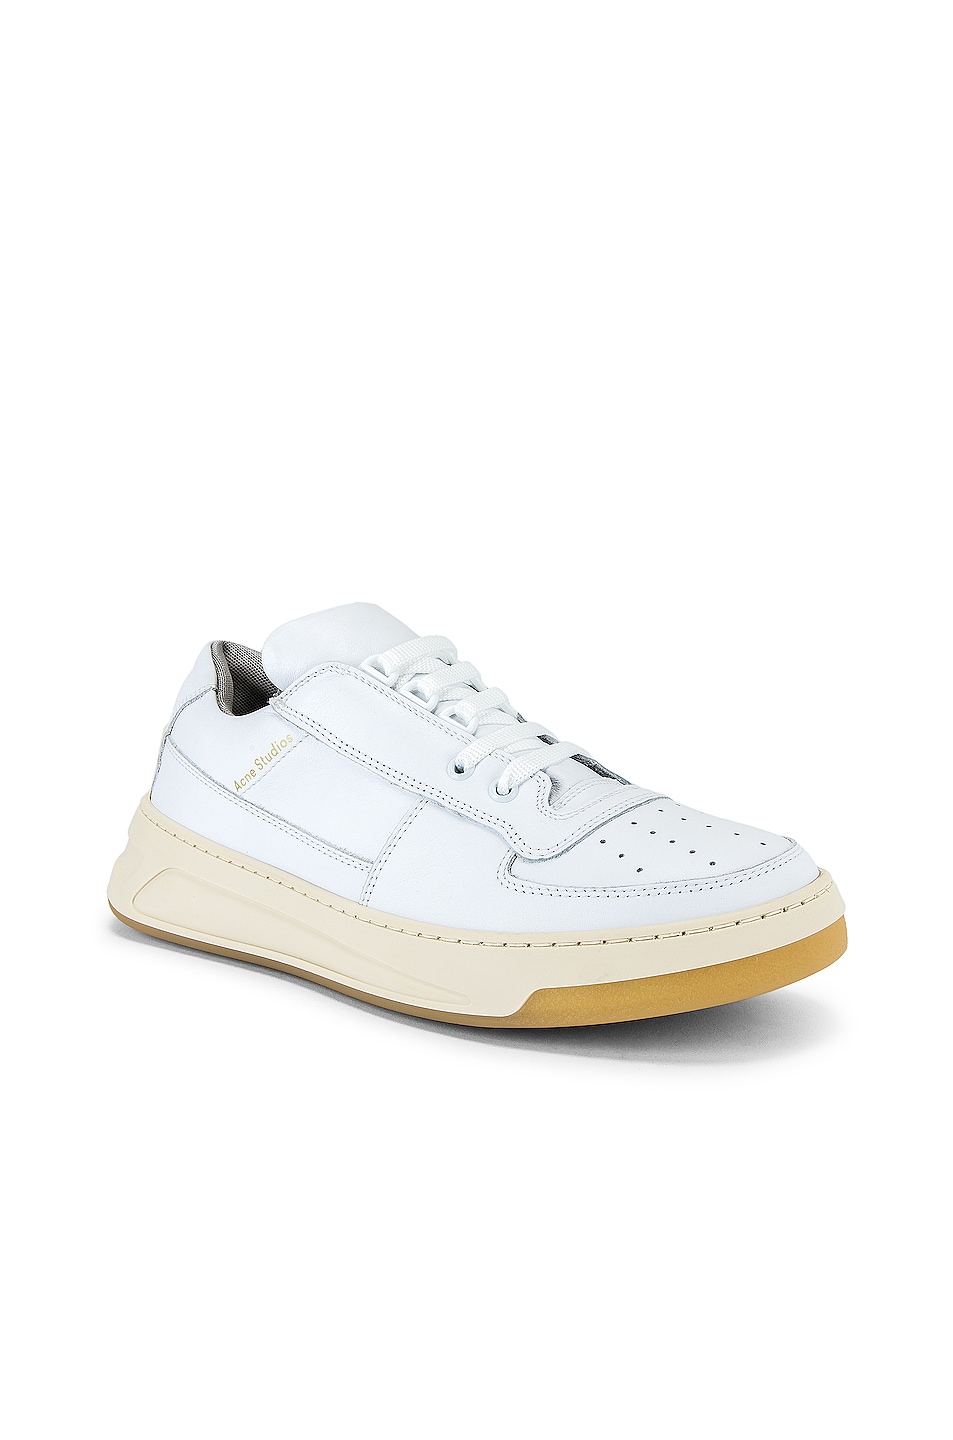 Image 1 of Acne Studios Perey Lace Up Sneakers in White